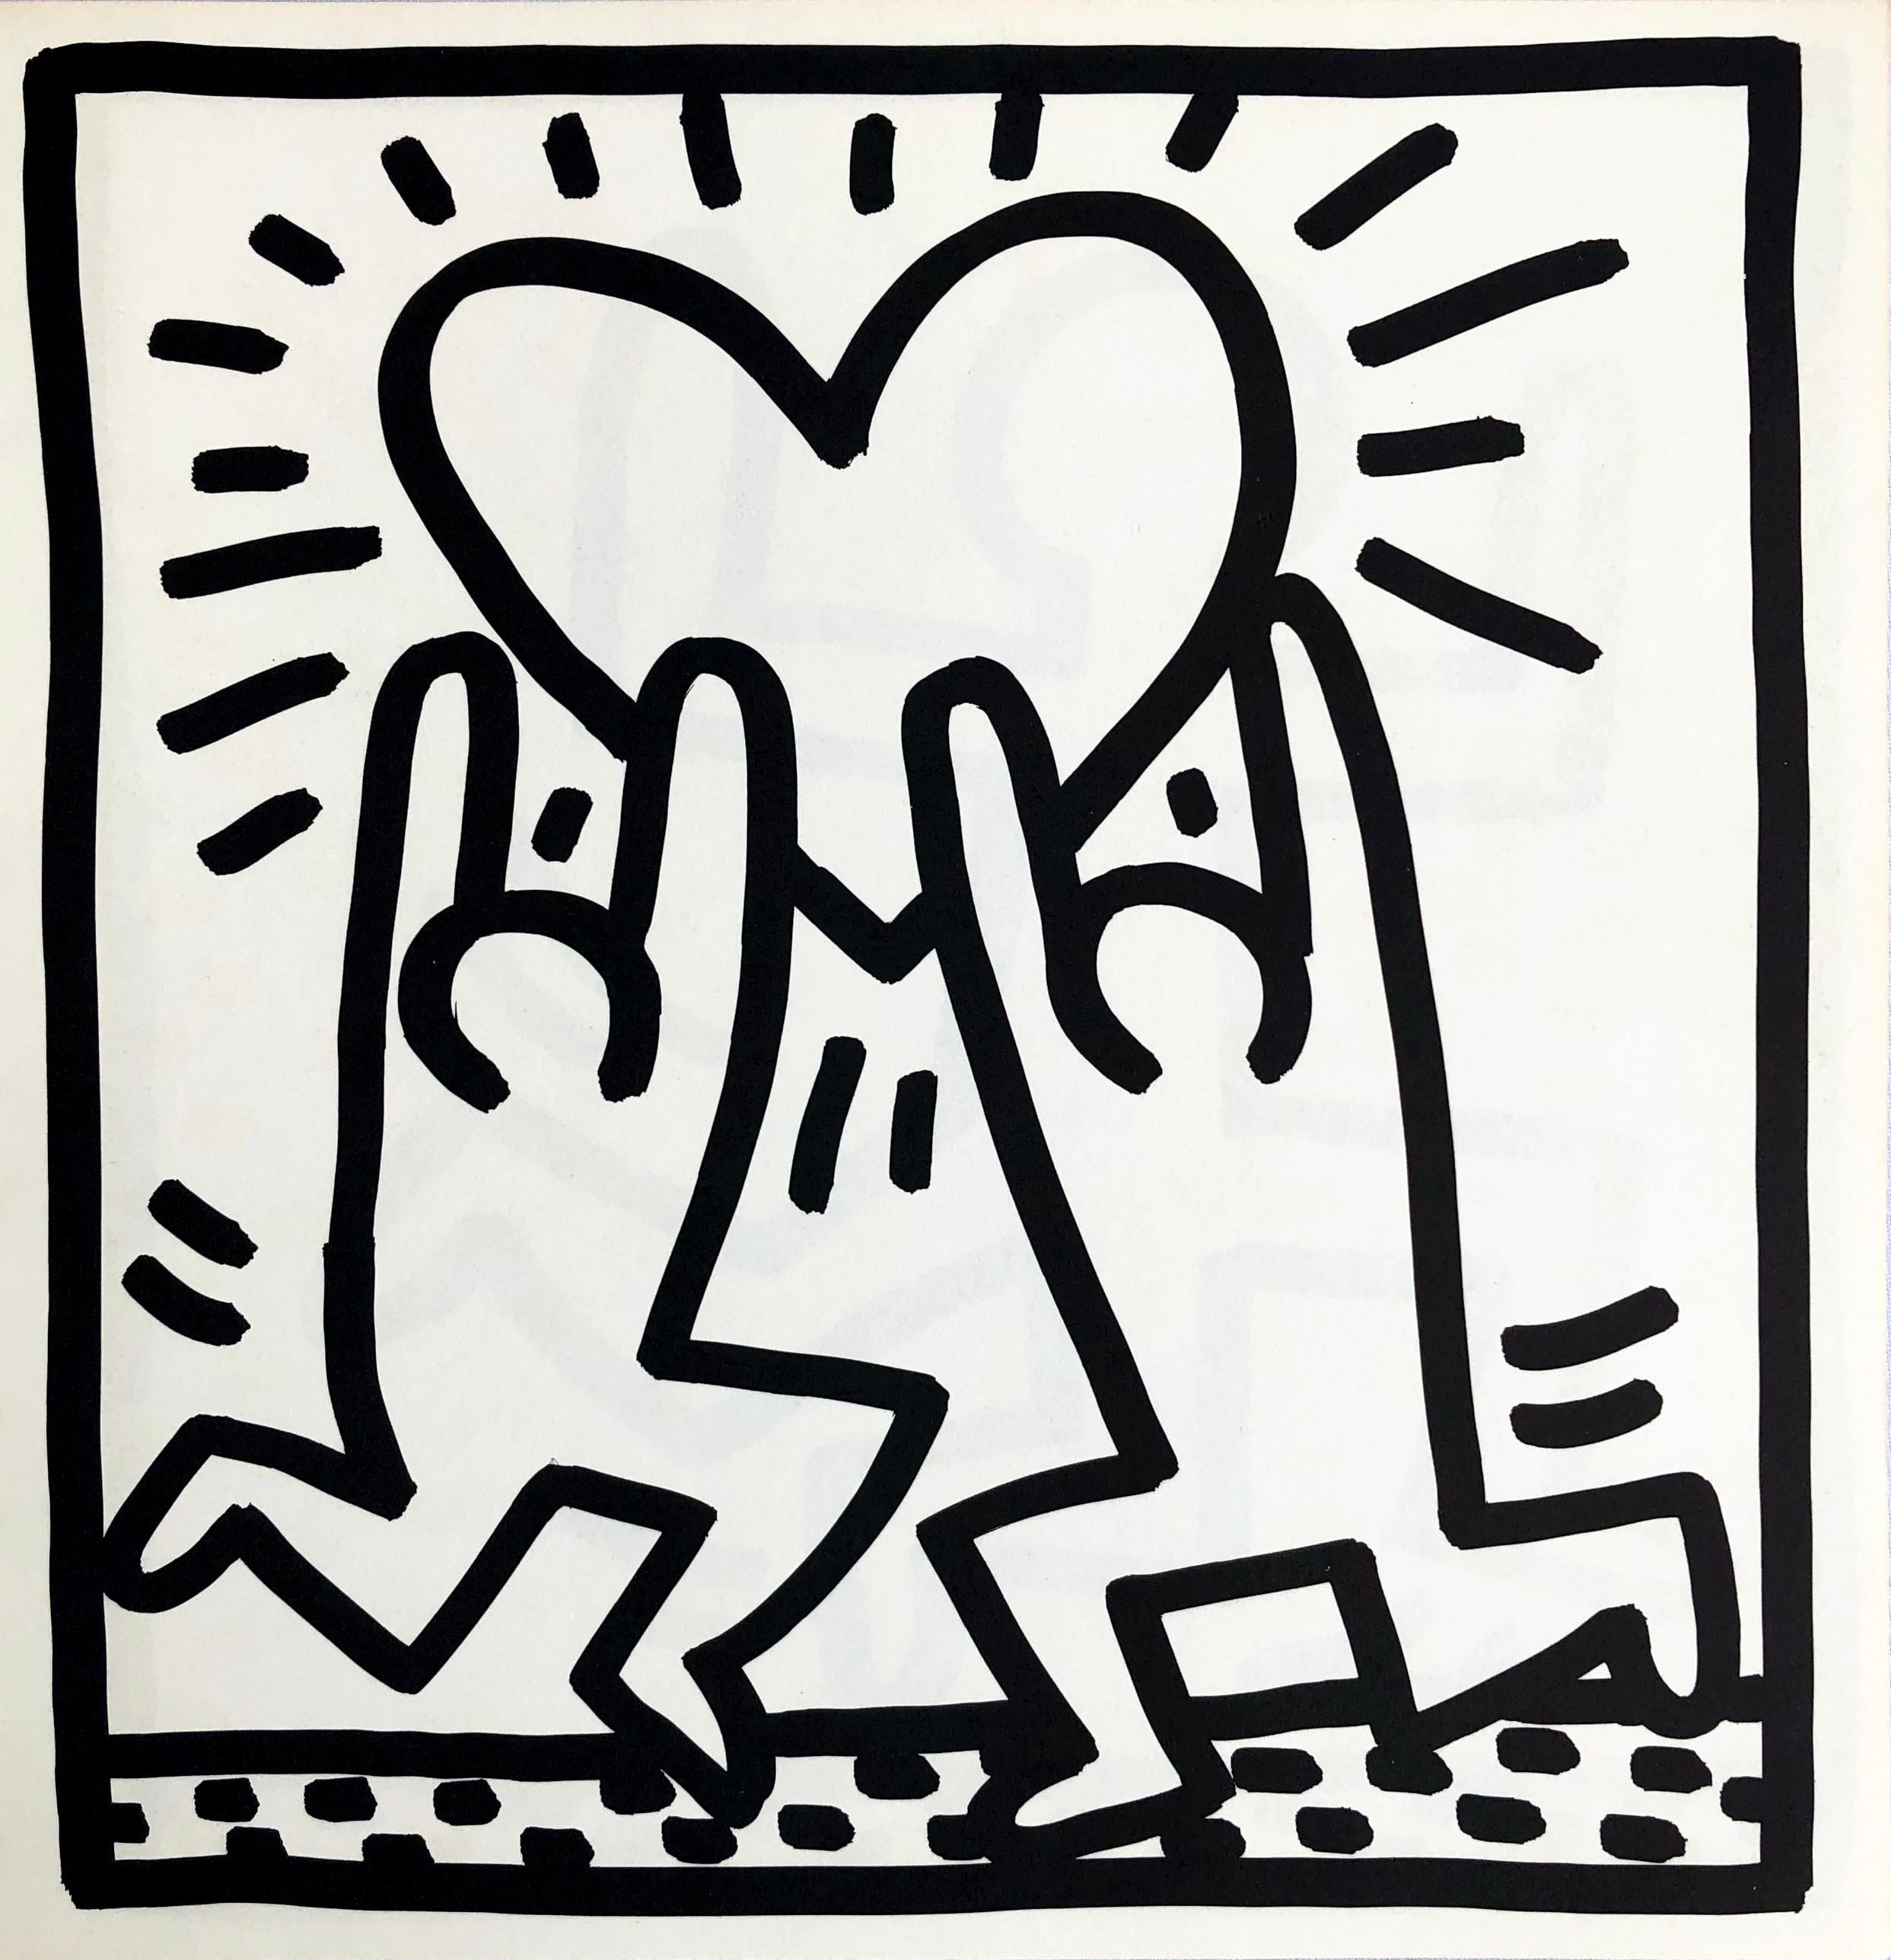 (after) Keith Haring Figurative Print - Keith Haring (untitled) Heart lithograph 1982 (Keith Haring heart)